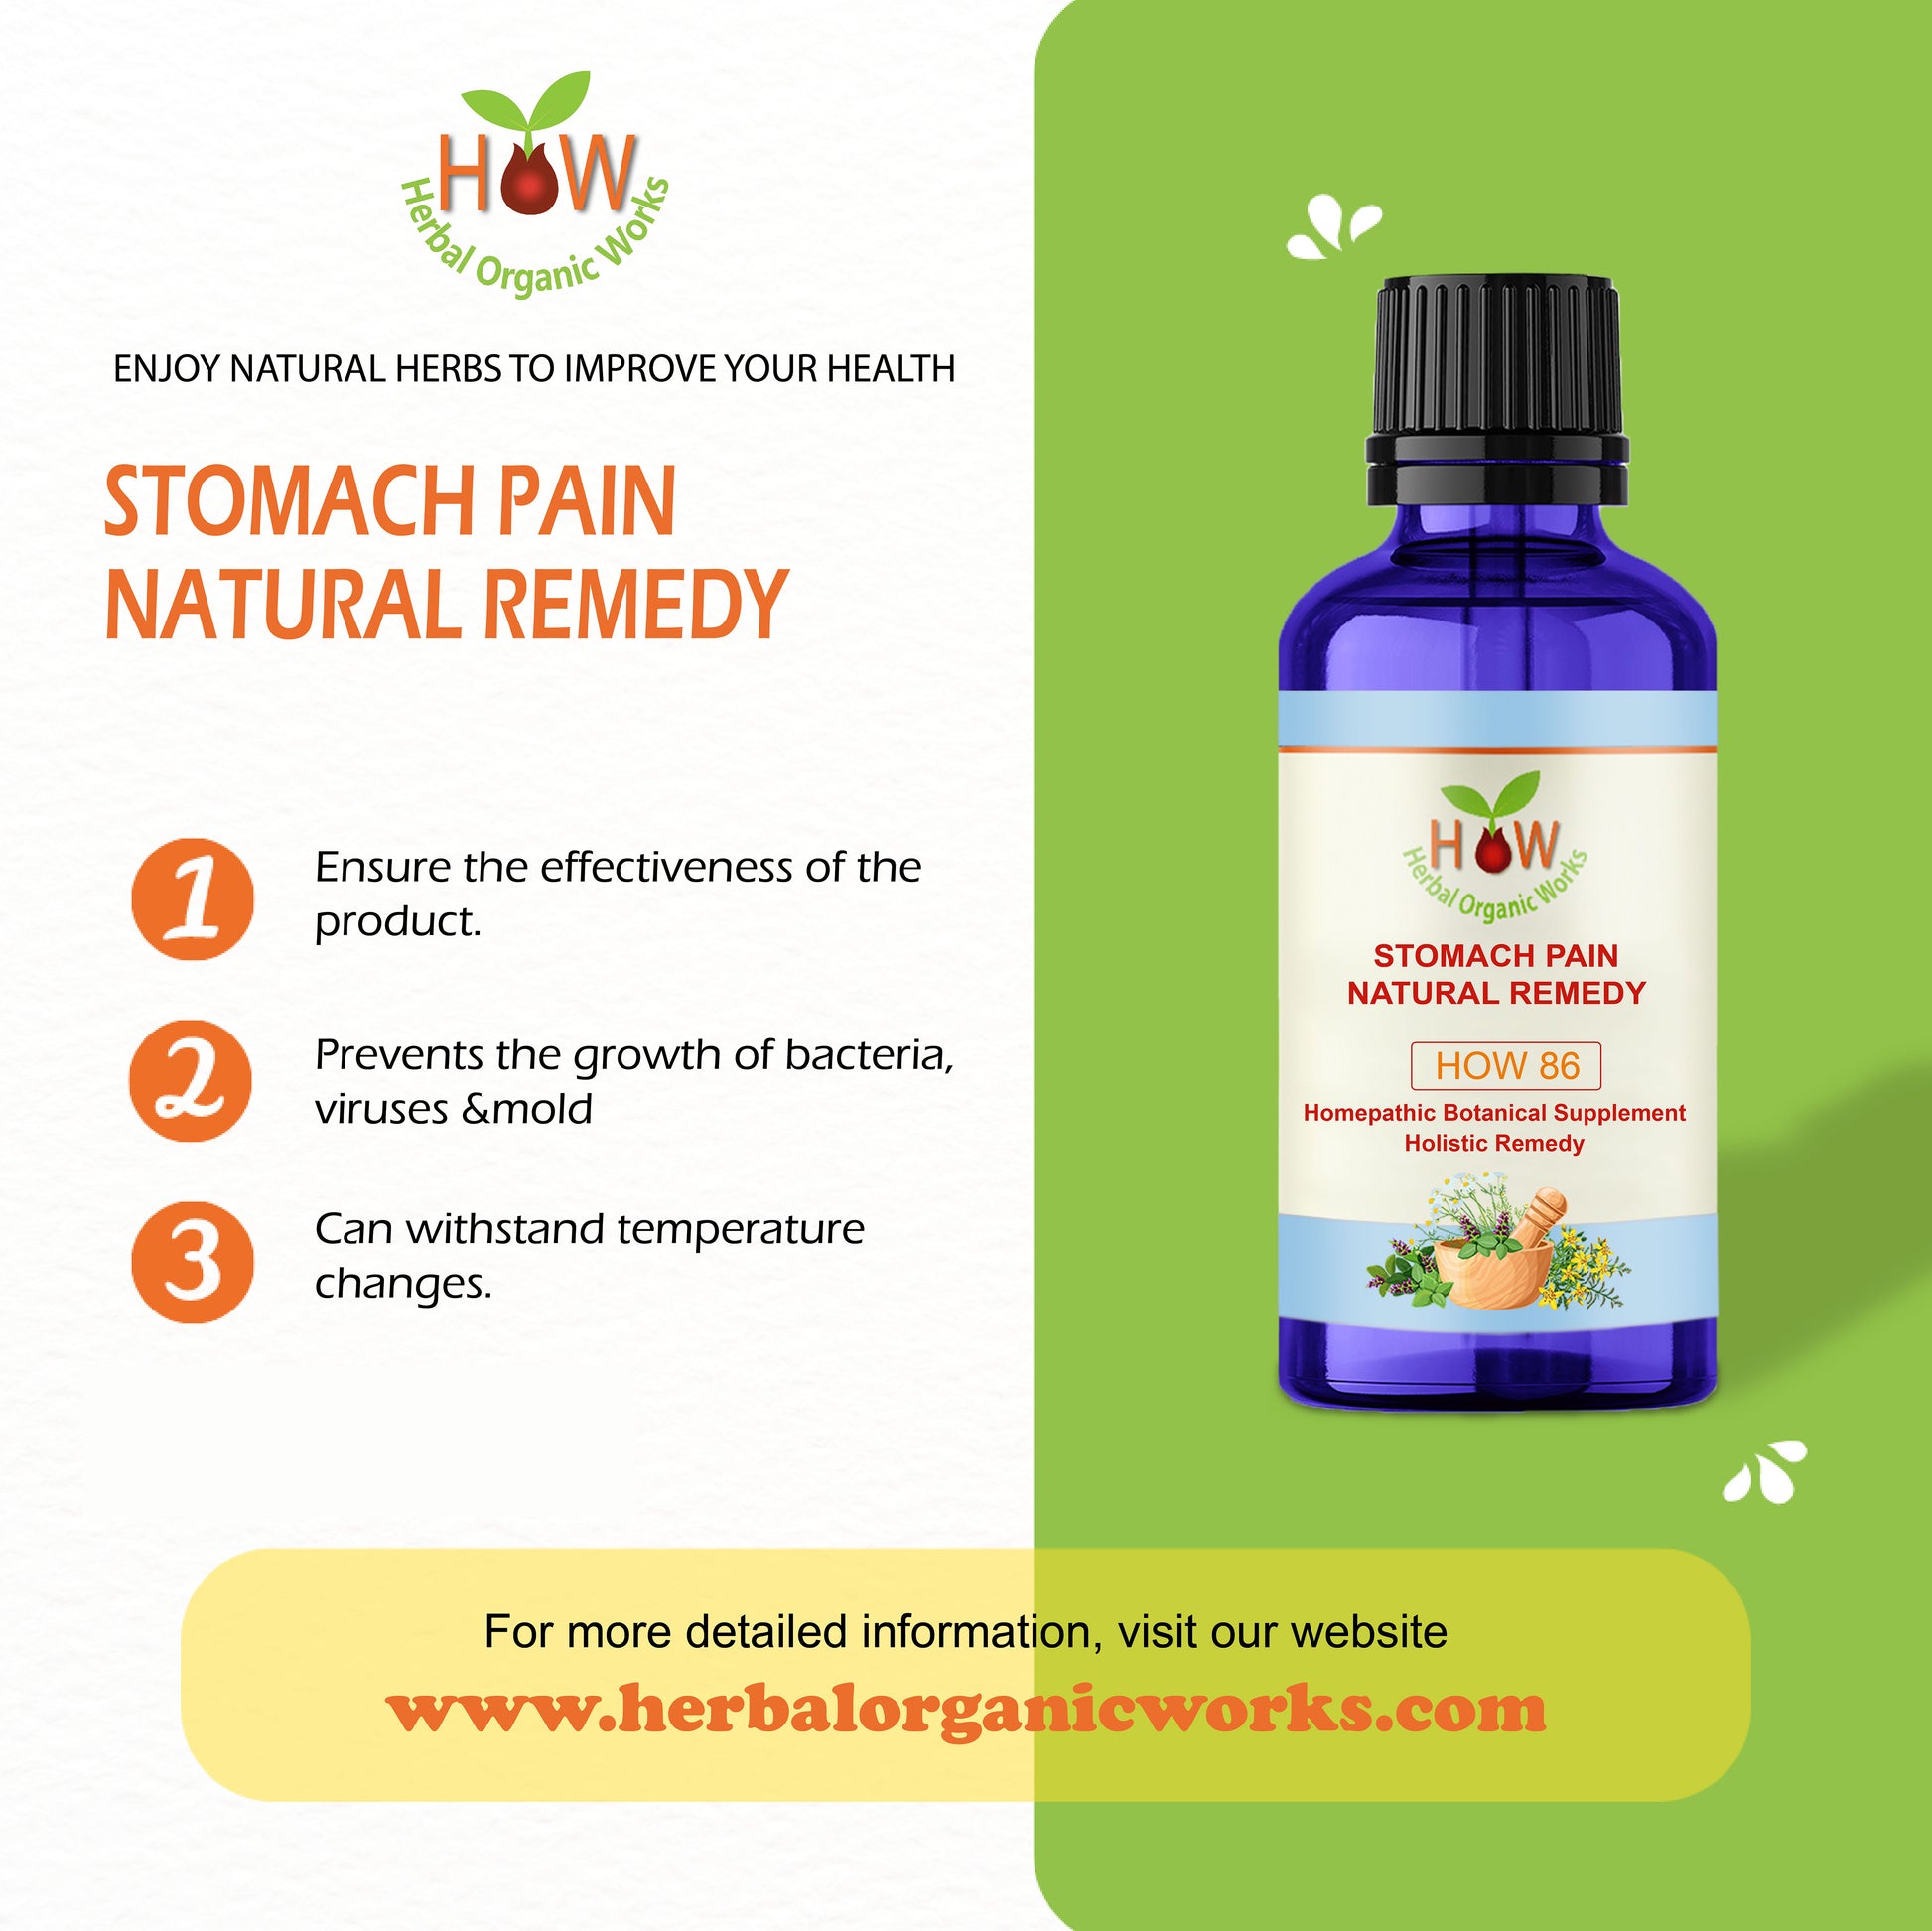 STOMACH PAIN NATURAL REMEDY (HOW86)